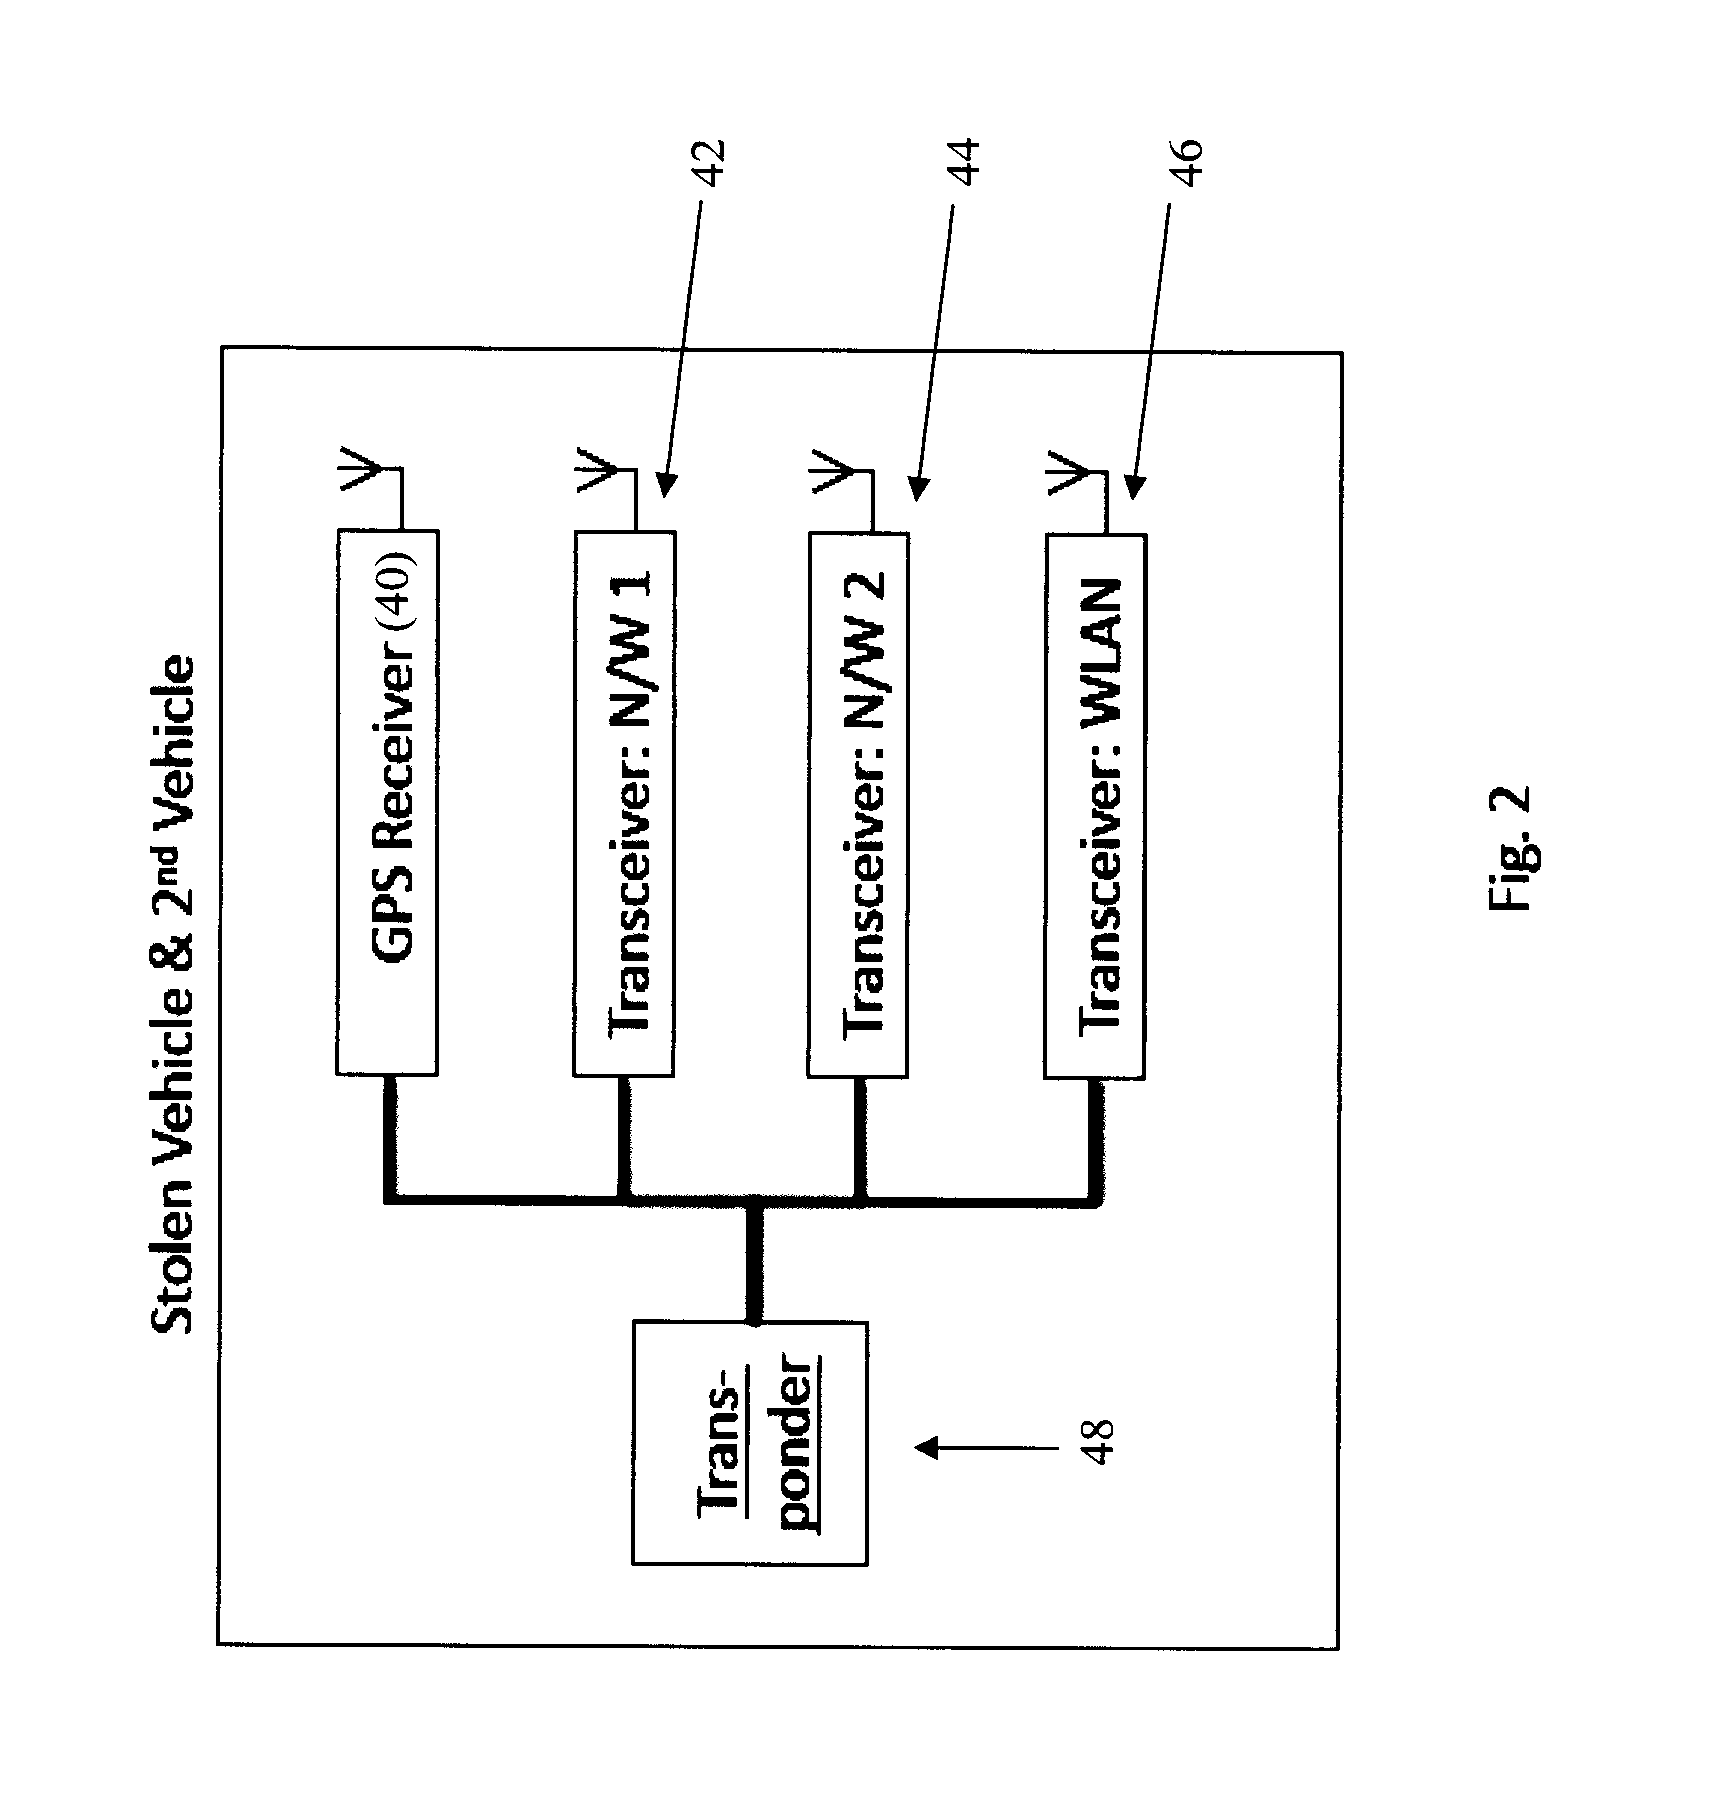 System and method for managing location of assets equipped with  transponder